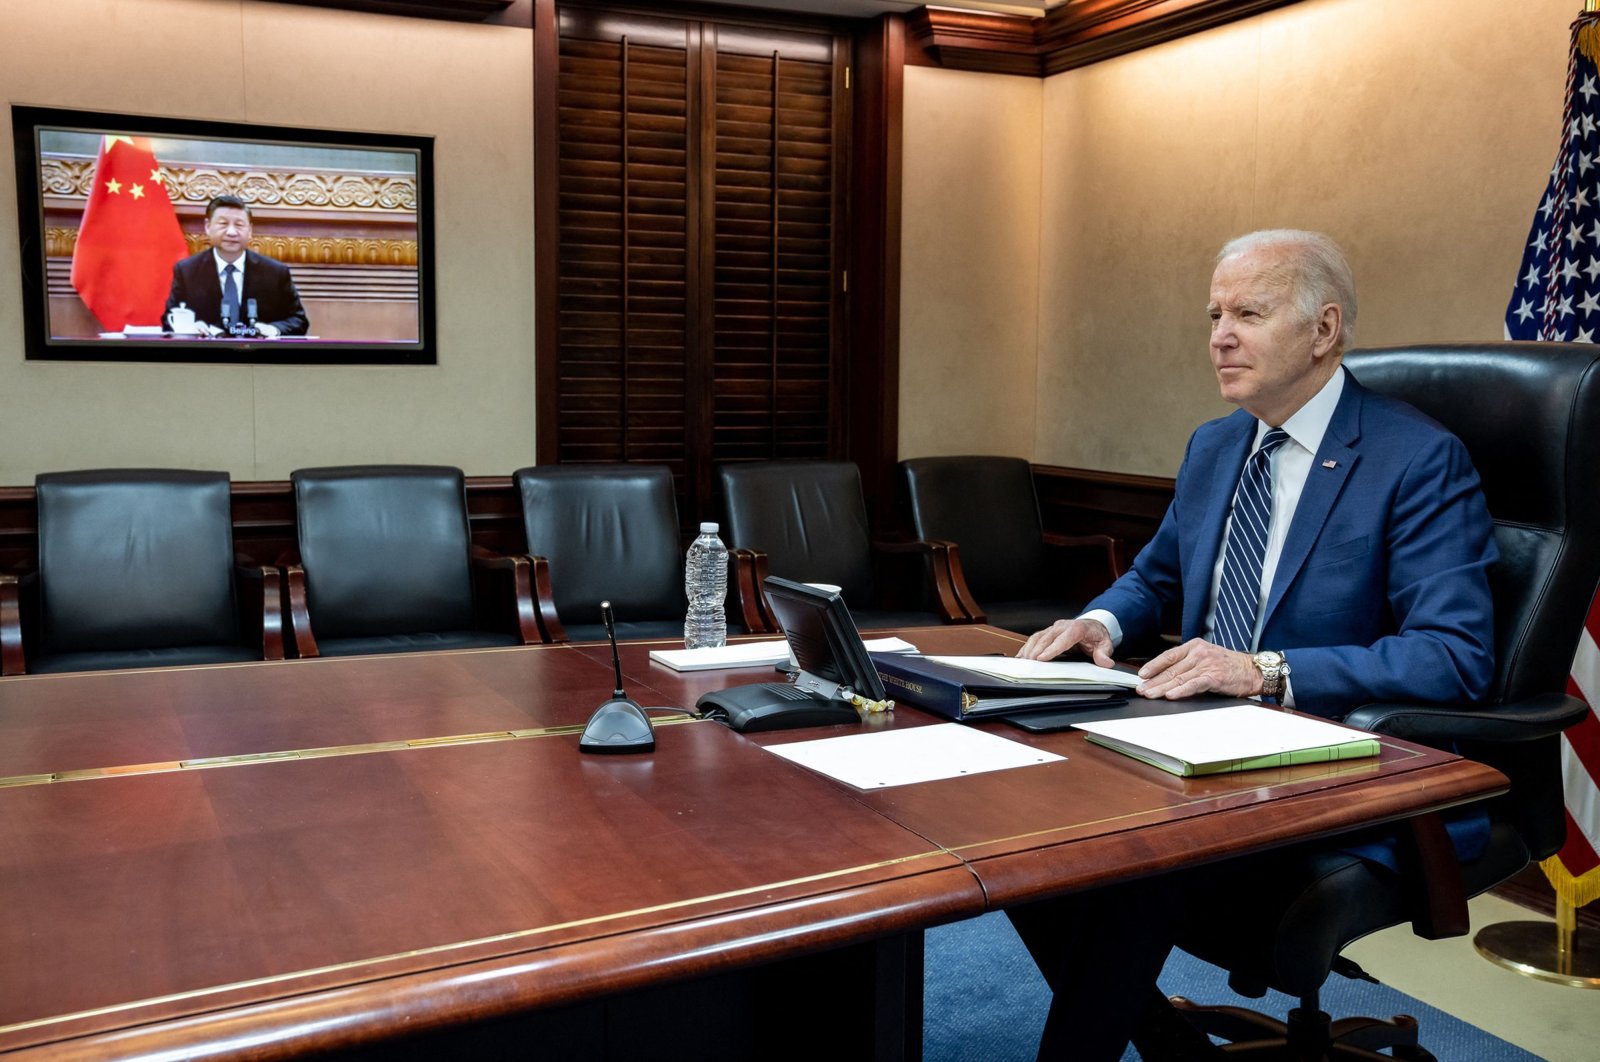 In this image released by the White House, U.S. President Joe Biden (L) speaks with Chinese President Xi Jinping (on screen) from the White House in Washington, DC, March 18, 2022. (AFP Photo)